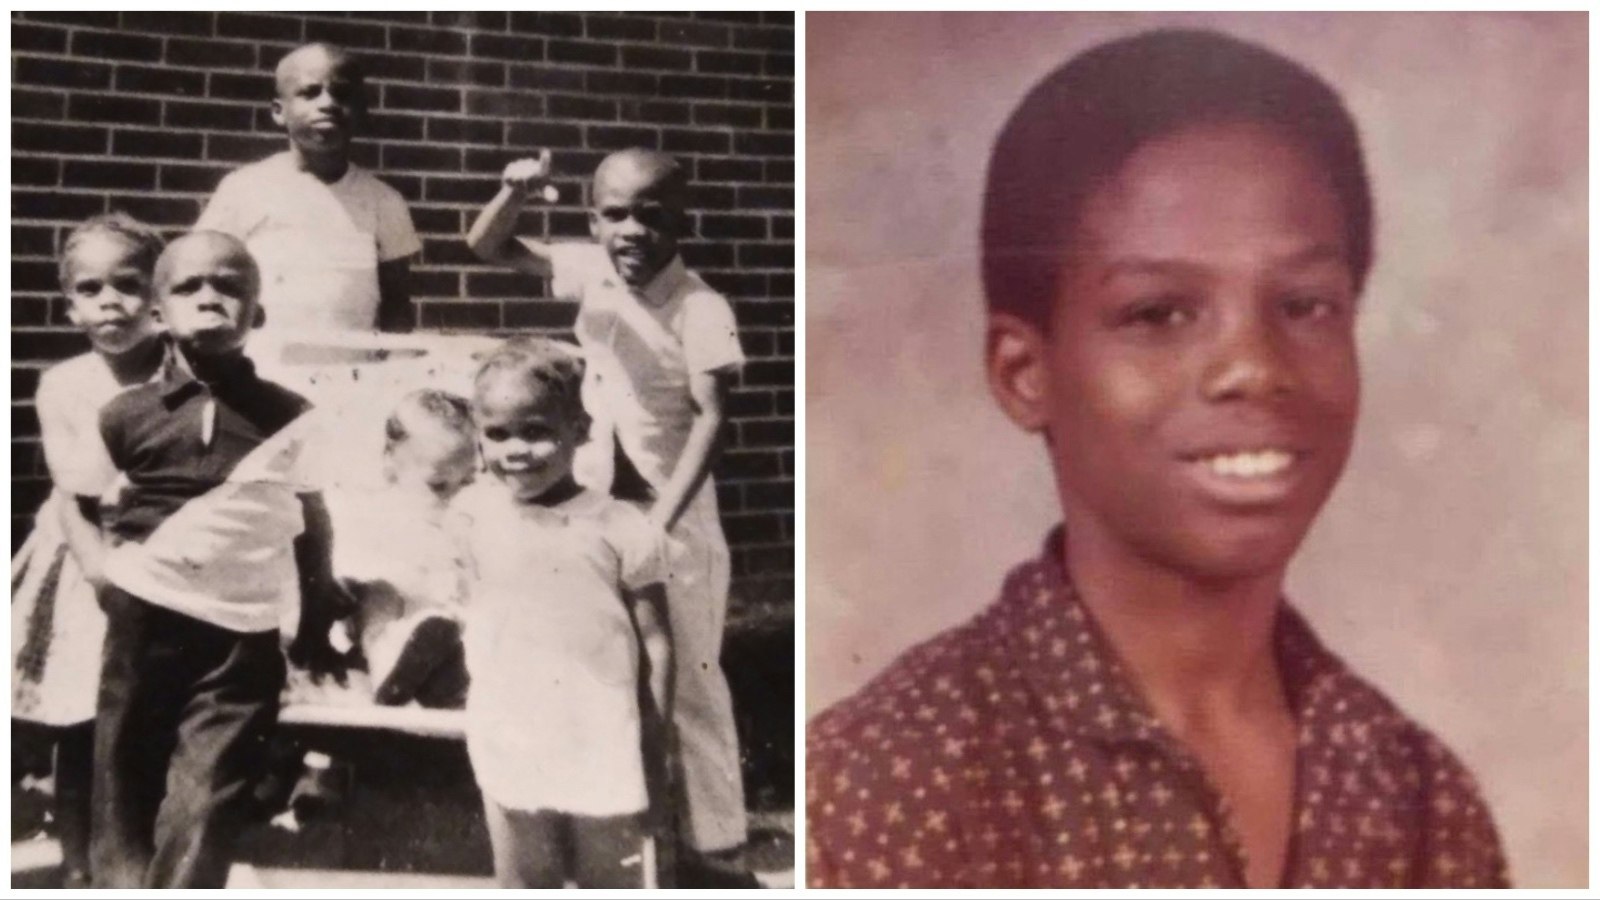 As a child in another life, Clarence Fisher couldn't have known he'd grow up to be in trouble with the law and finally serve a 32-year prison sentence. He's pictured here with his siblings in the 1960s (far back) and at age 10, right.